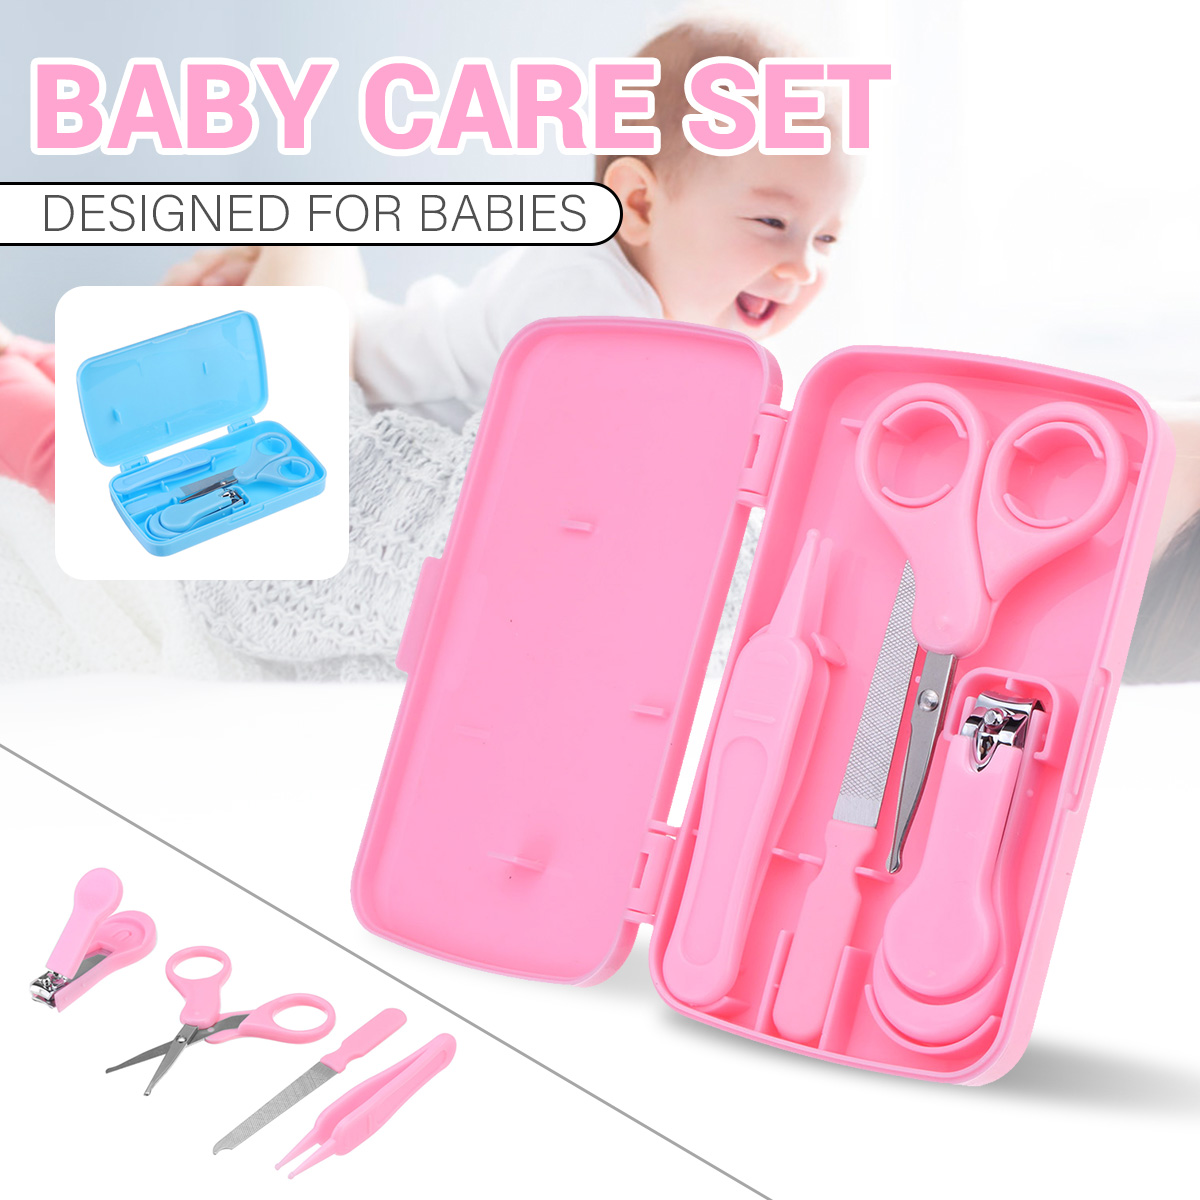 4pcs-Baby-Care-Set-Stainless-Steel-Children-Nail-Clippers-Nail-File-Tools-Set-1791871-2